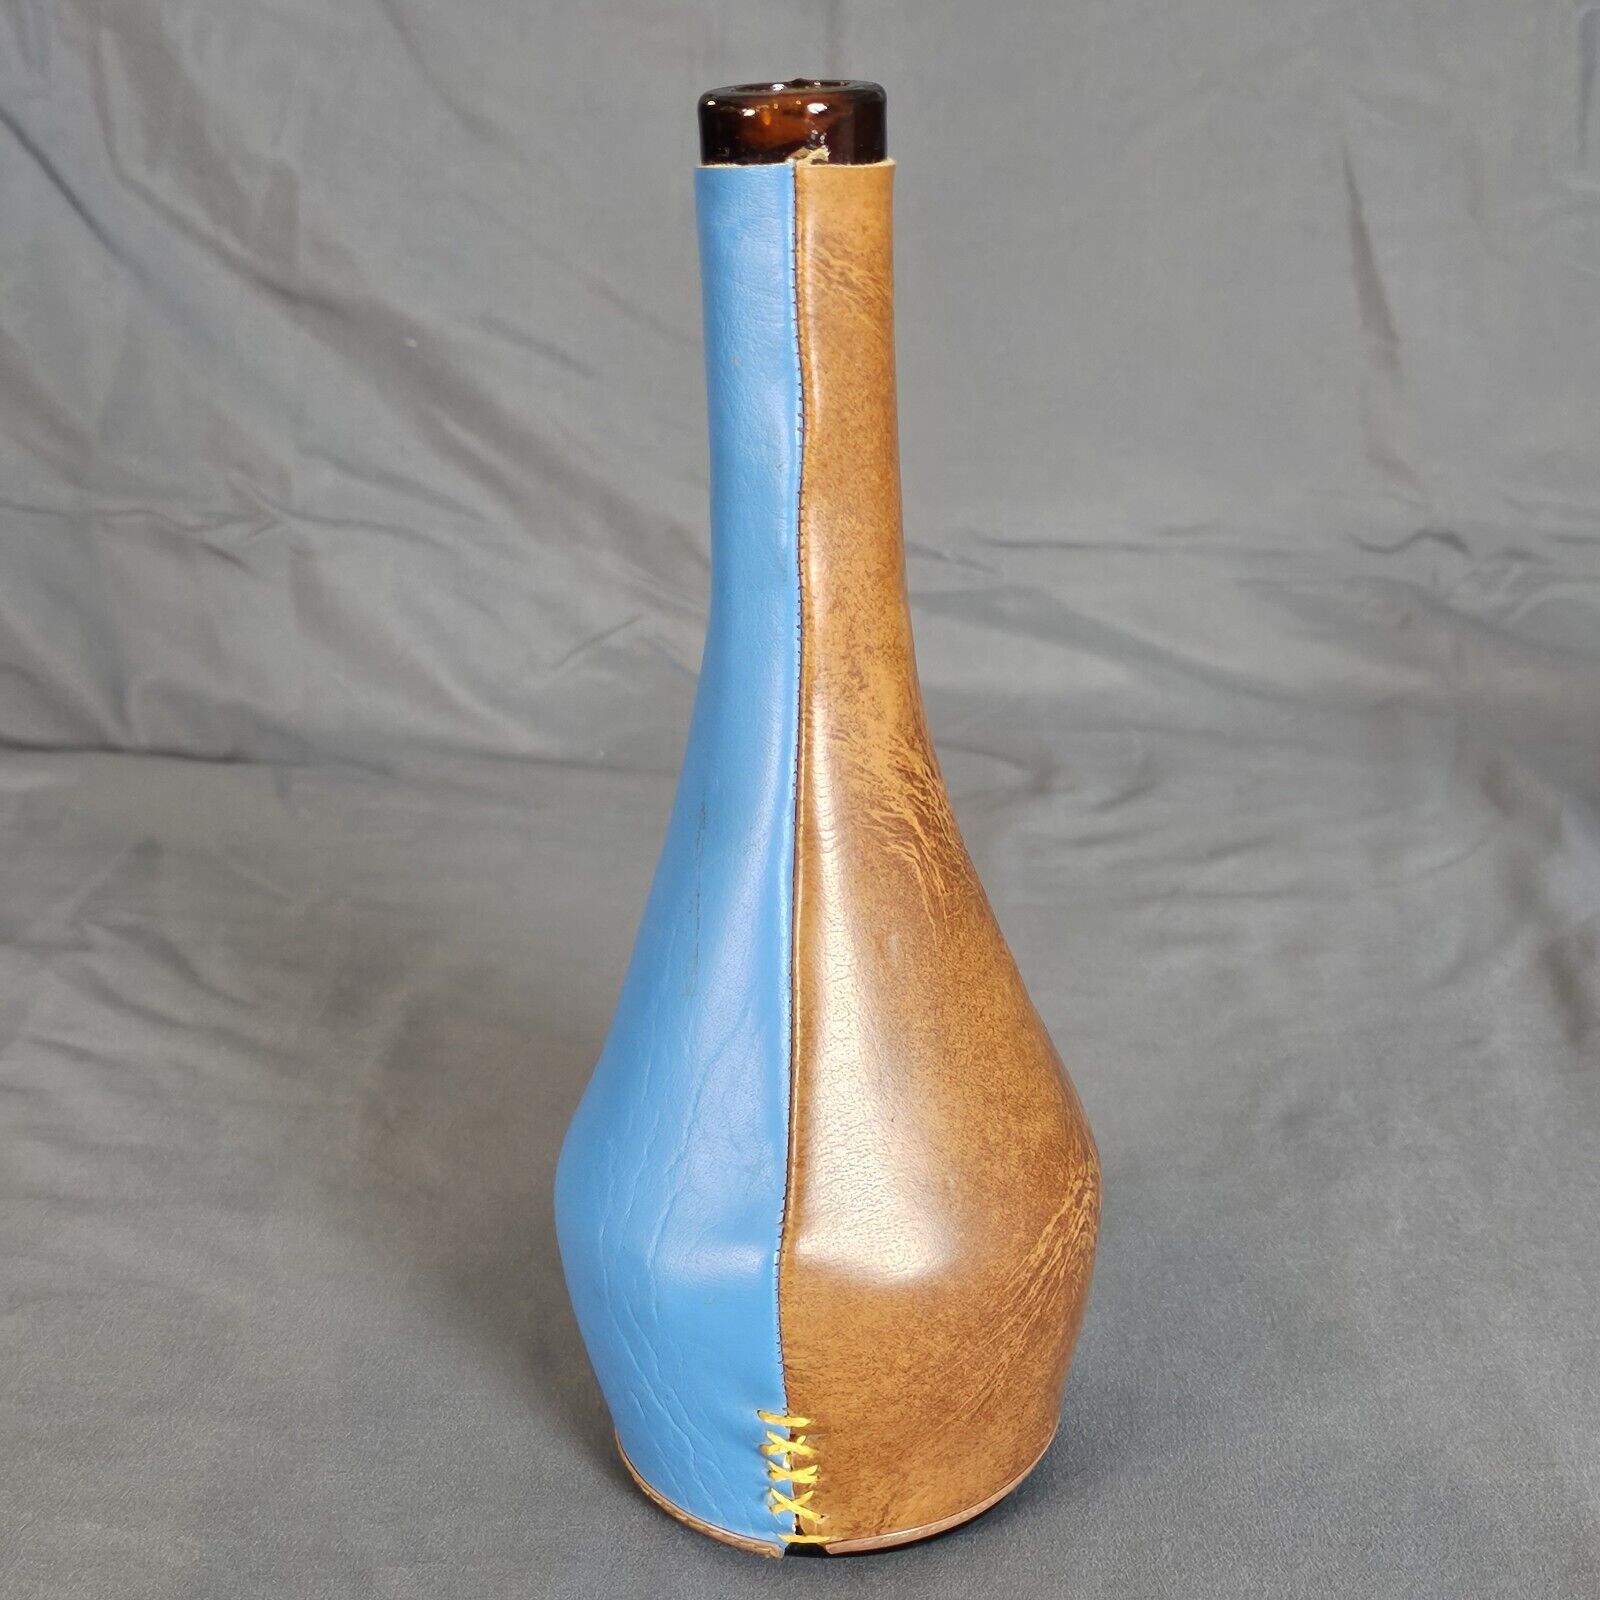 Vintage Pier 1 Imports Genie Bottle Leather Covered Glass Made In Spain PLS READ